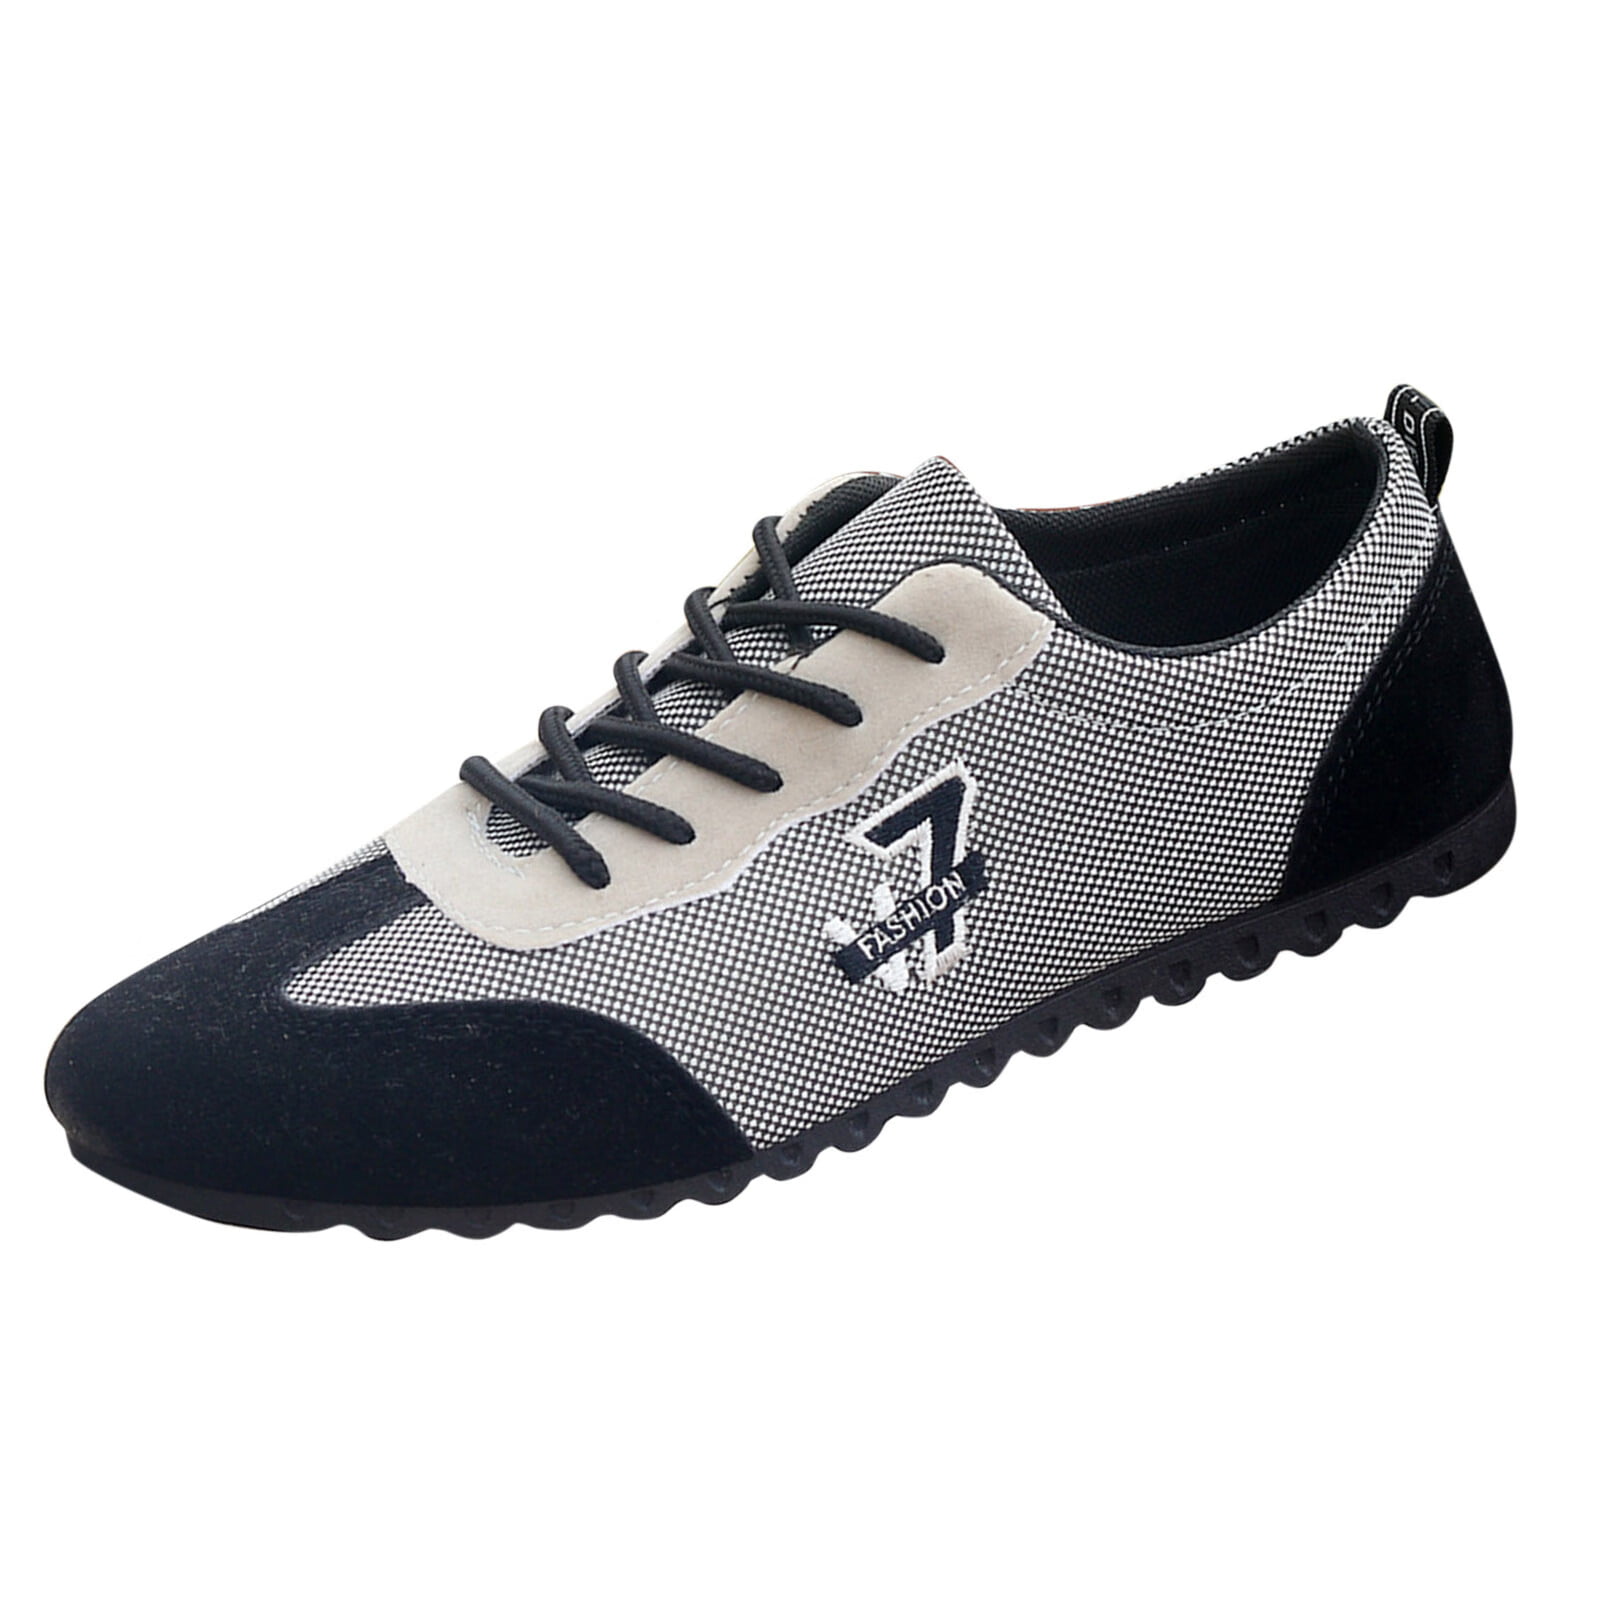 Buy Men's Red & White Color Block Casual Shoes Online in India at Bewakoof